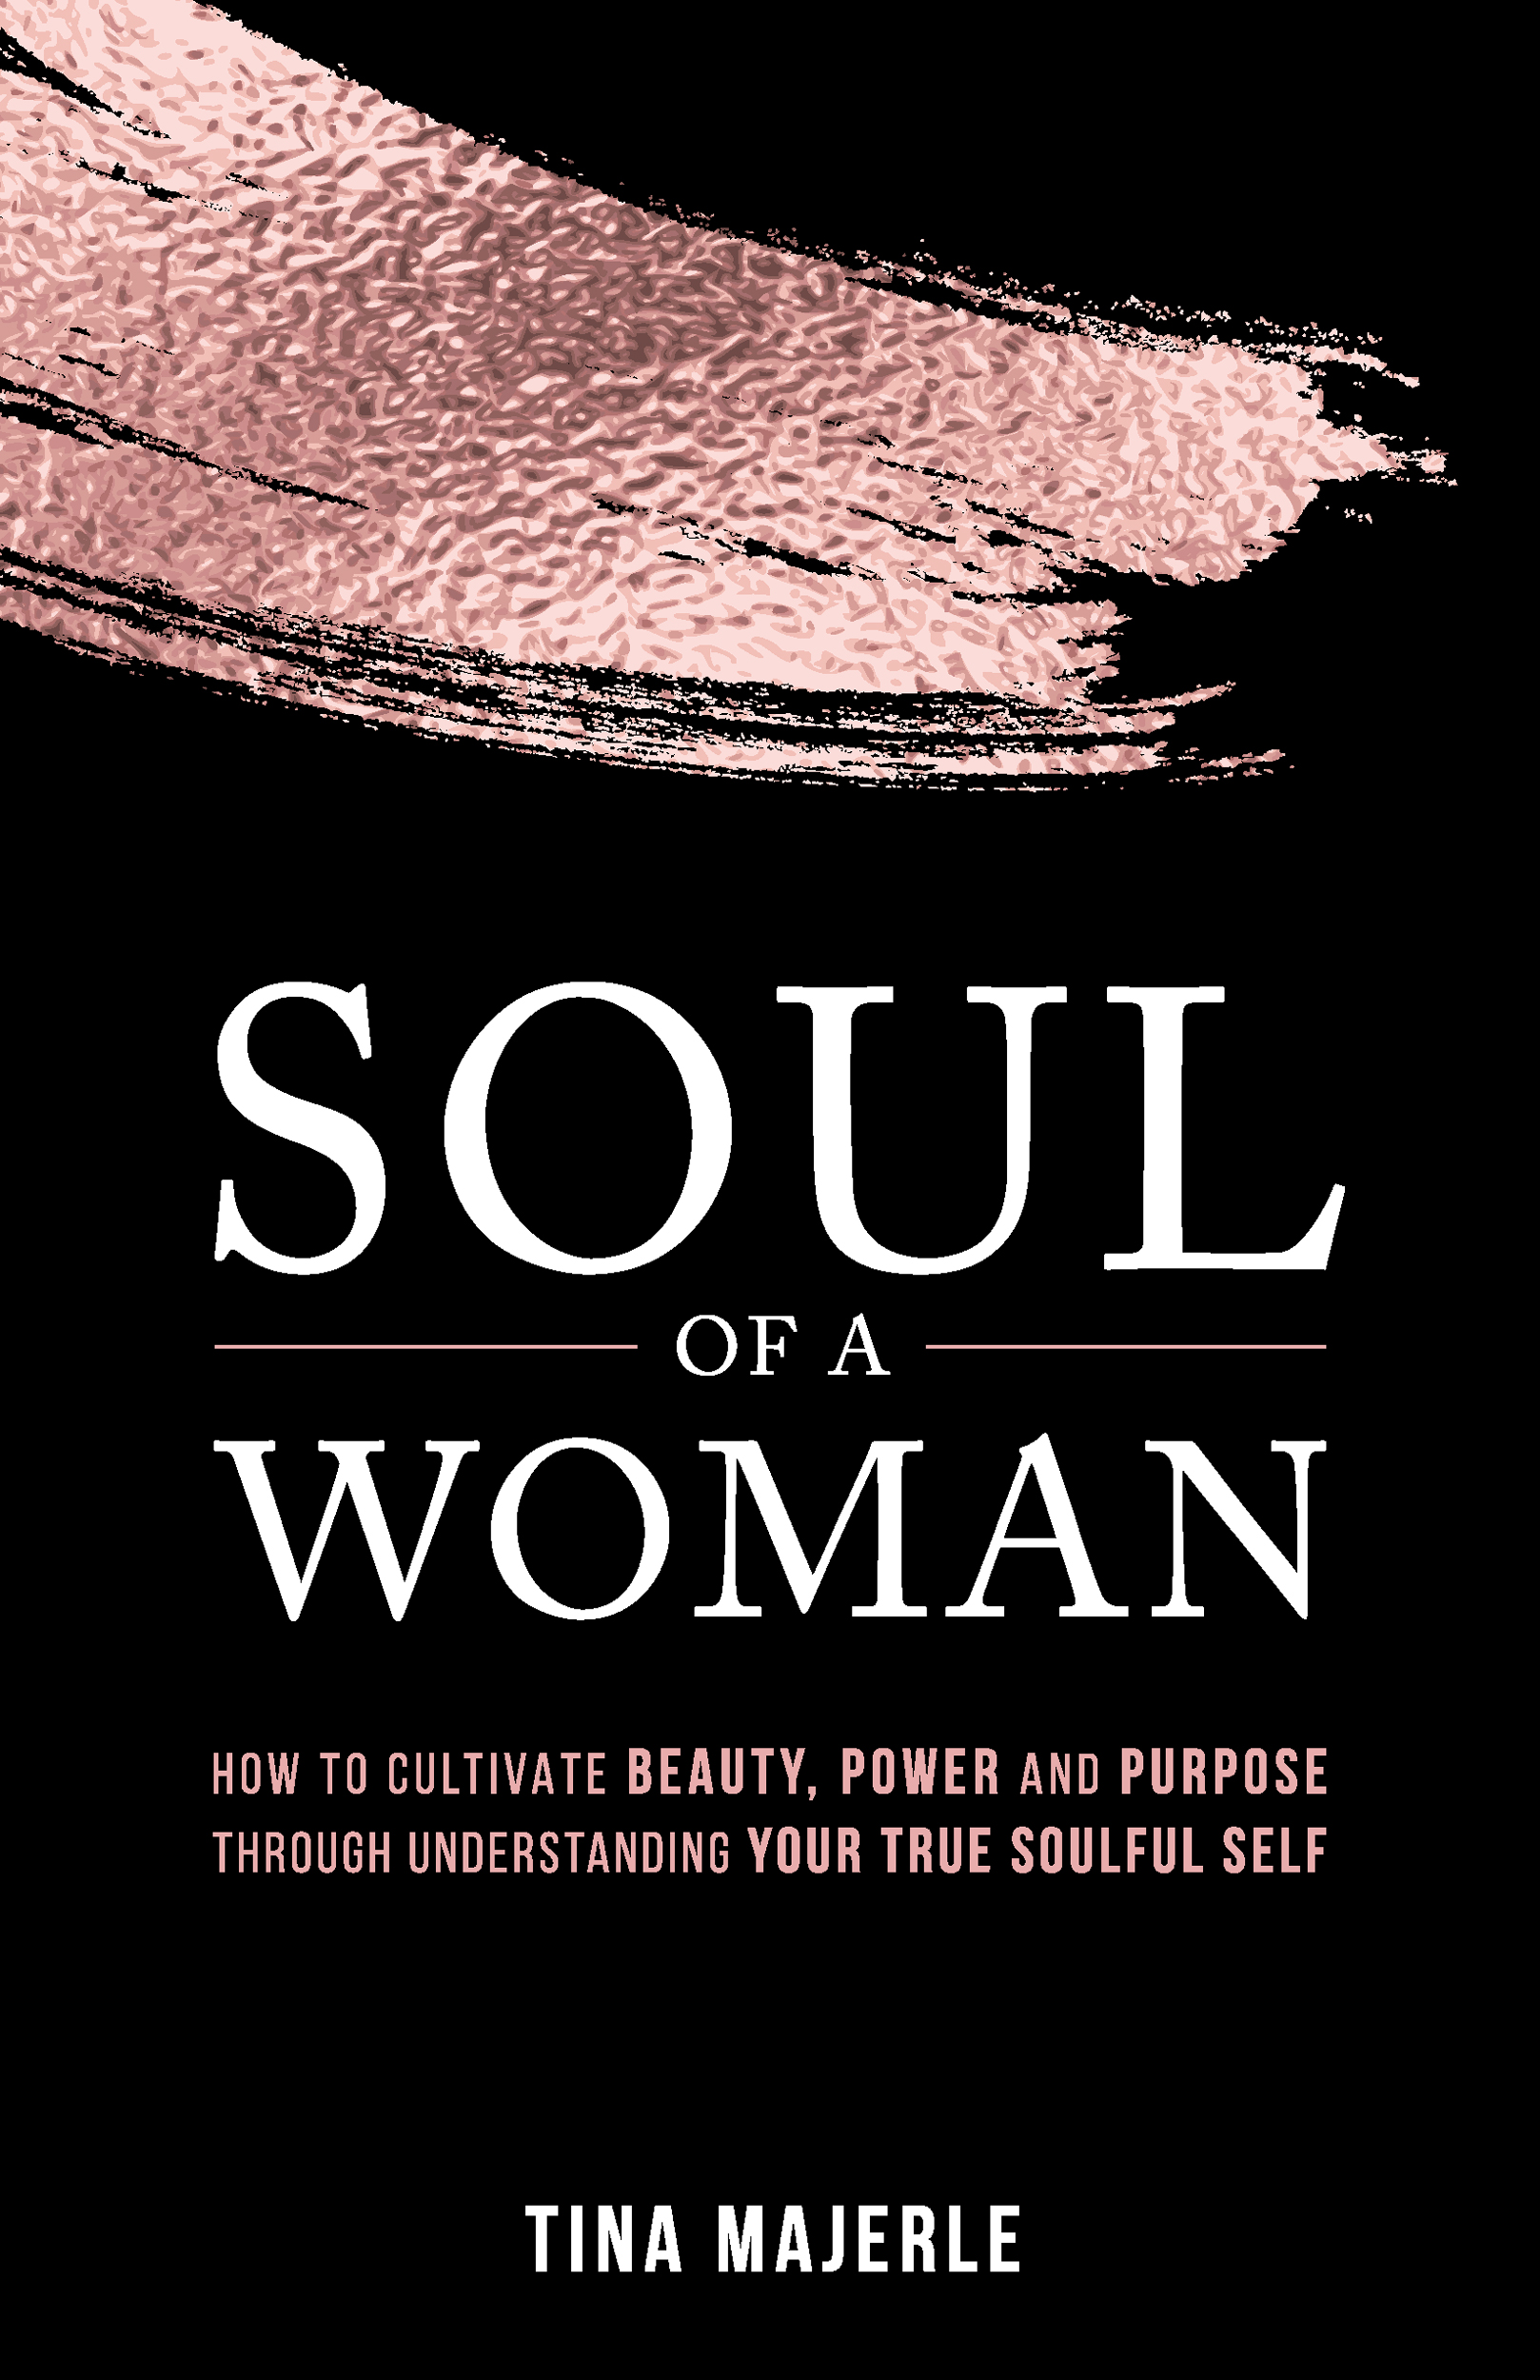 Soul of a Woman book cover, black background white text